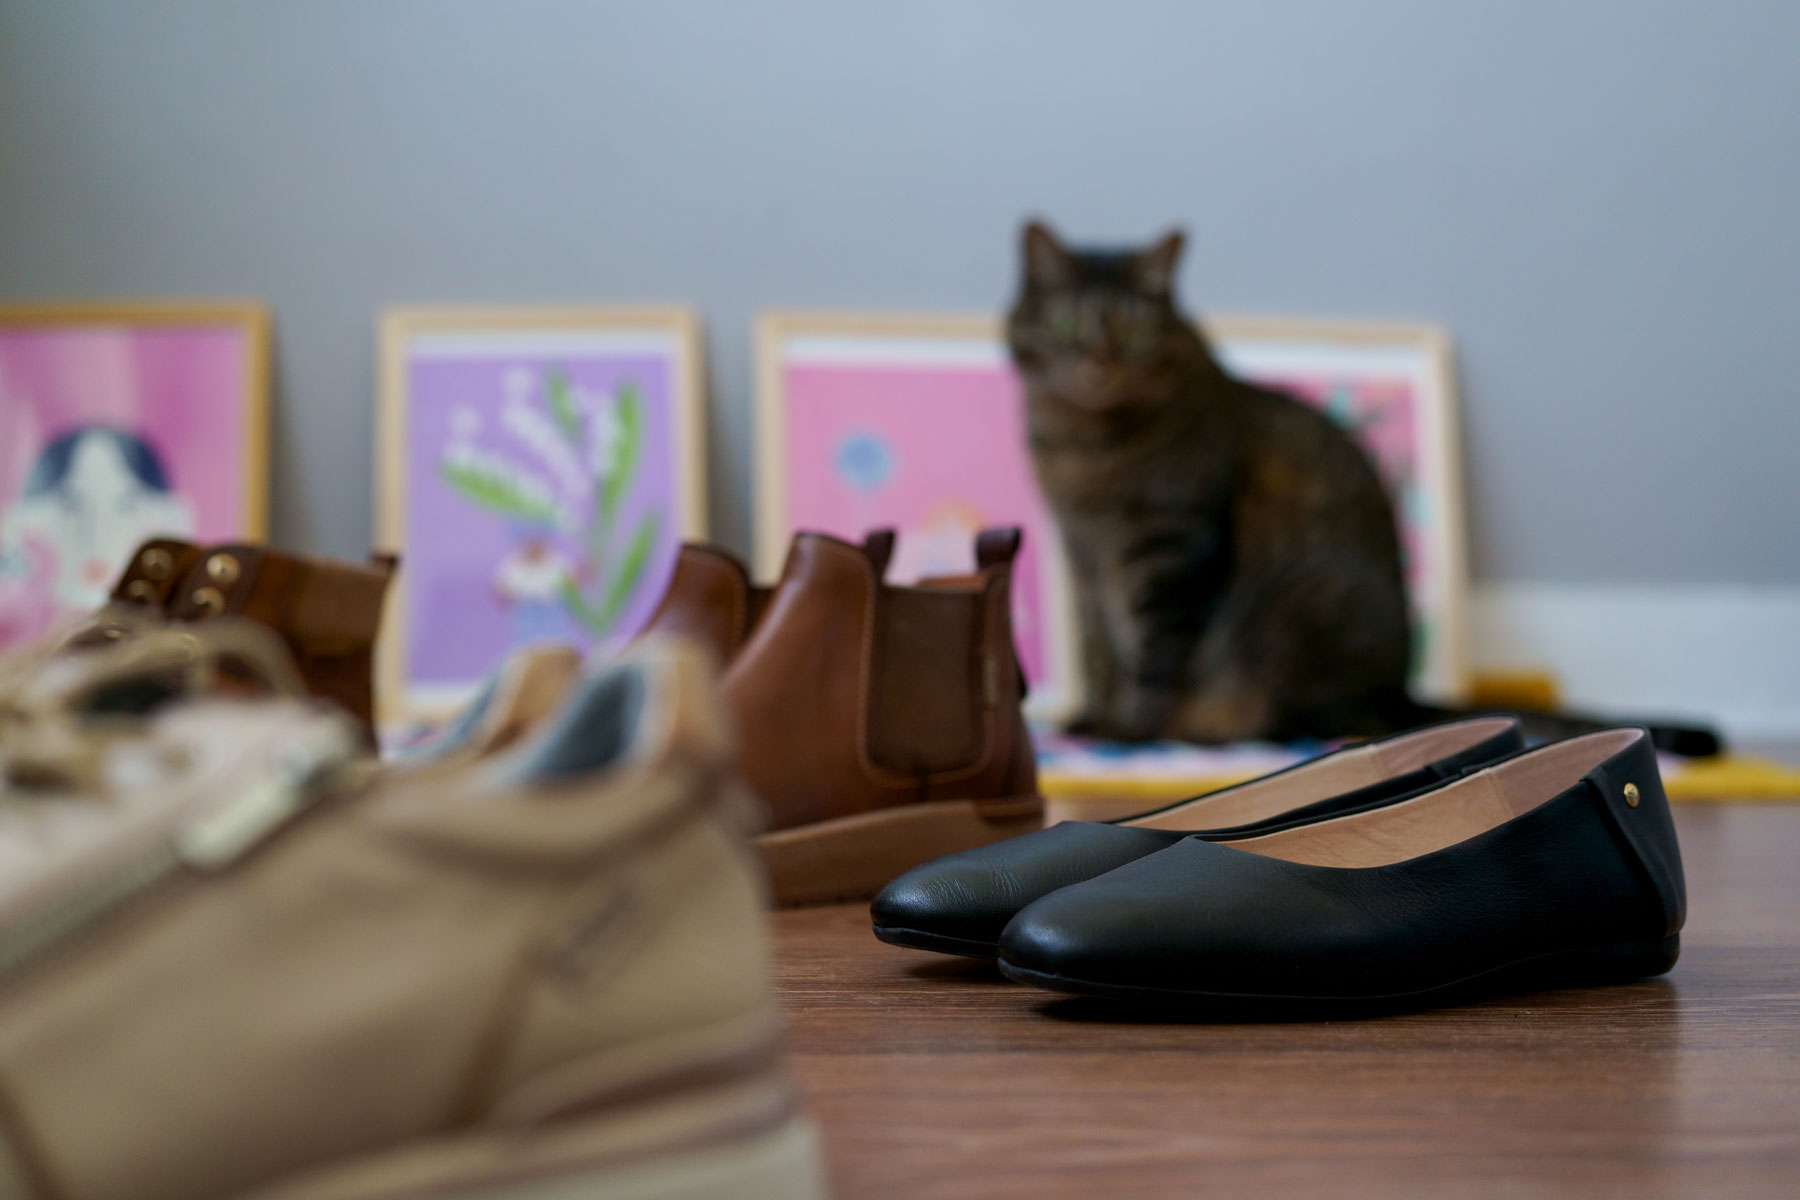 Photograph of various women's shoes from Pikolinos and in the background the paintings
                            painted by Marie and her cat.